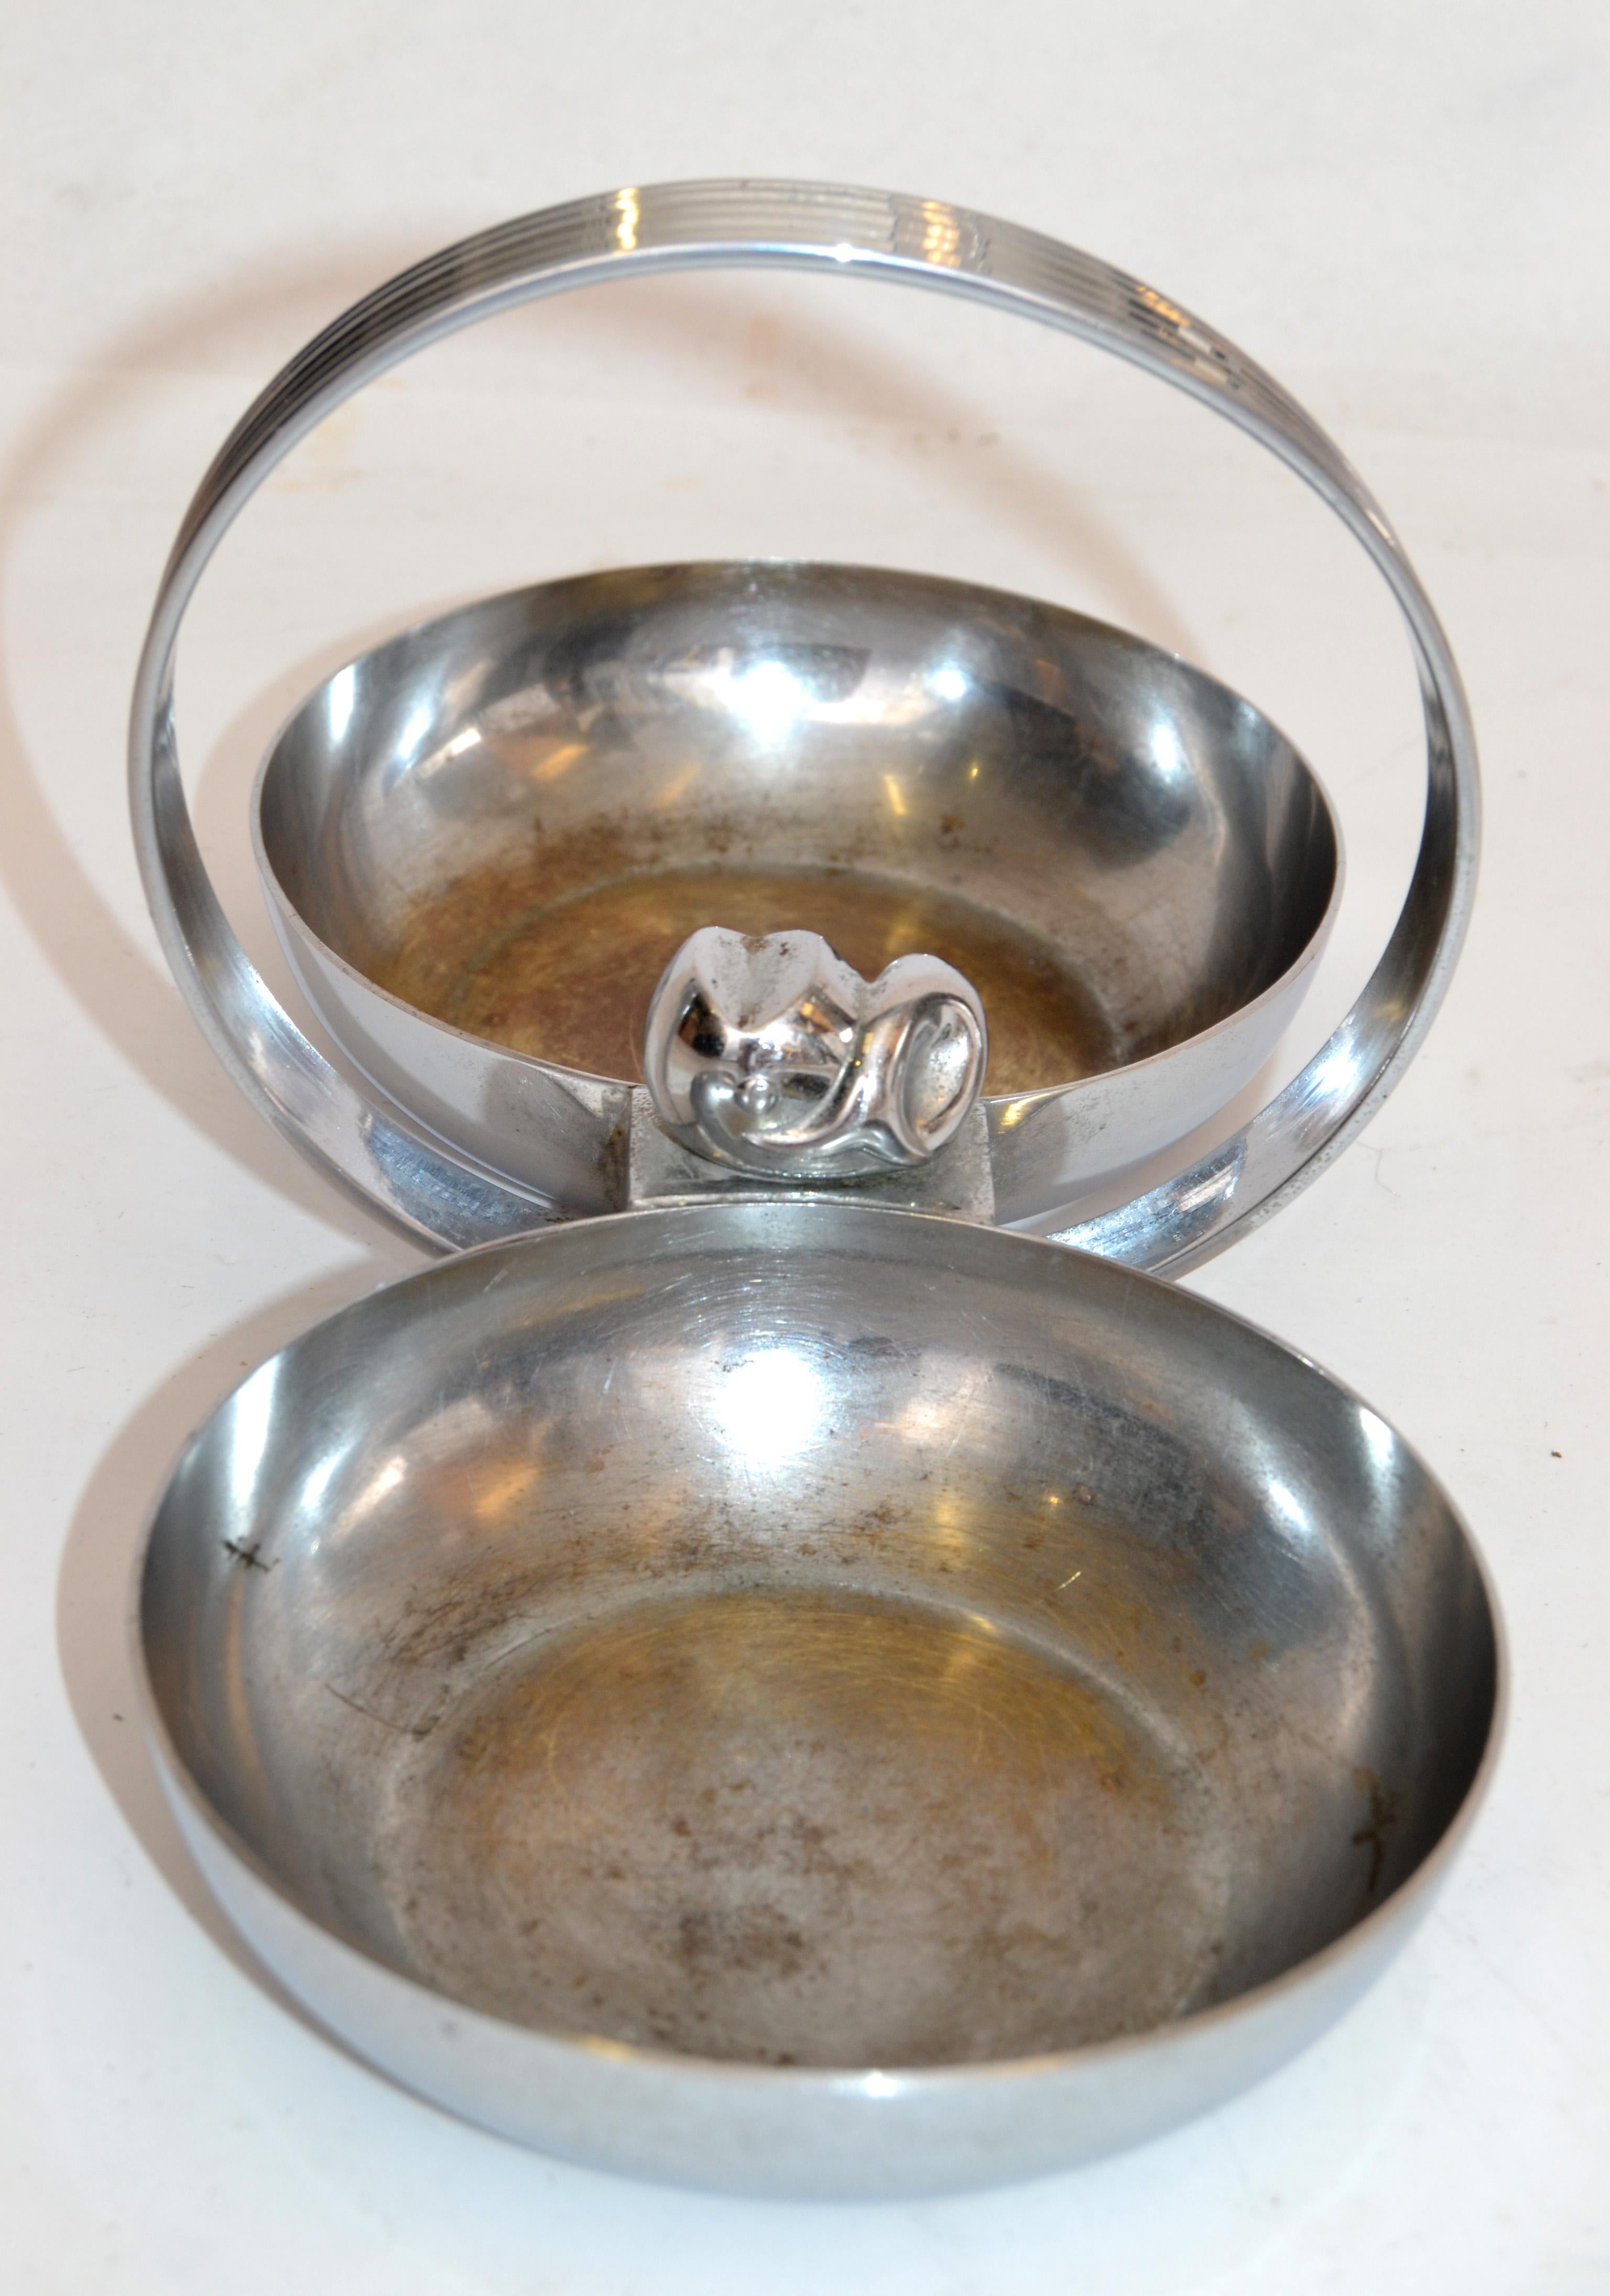 Hand-Crafted Art Deco Chase USA Chrome on Brass Twin Candy & Nut Dish designed Gerth & Gerth For Sale